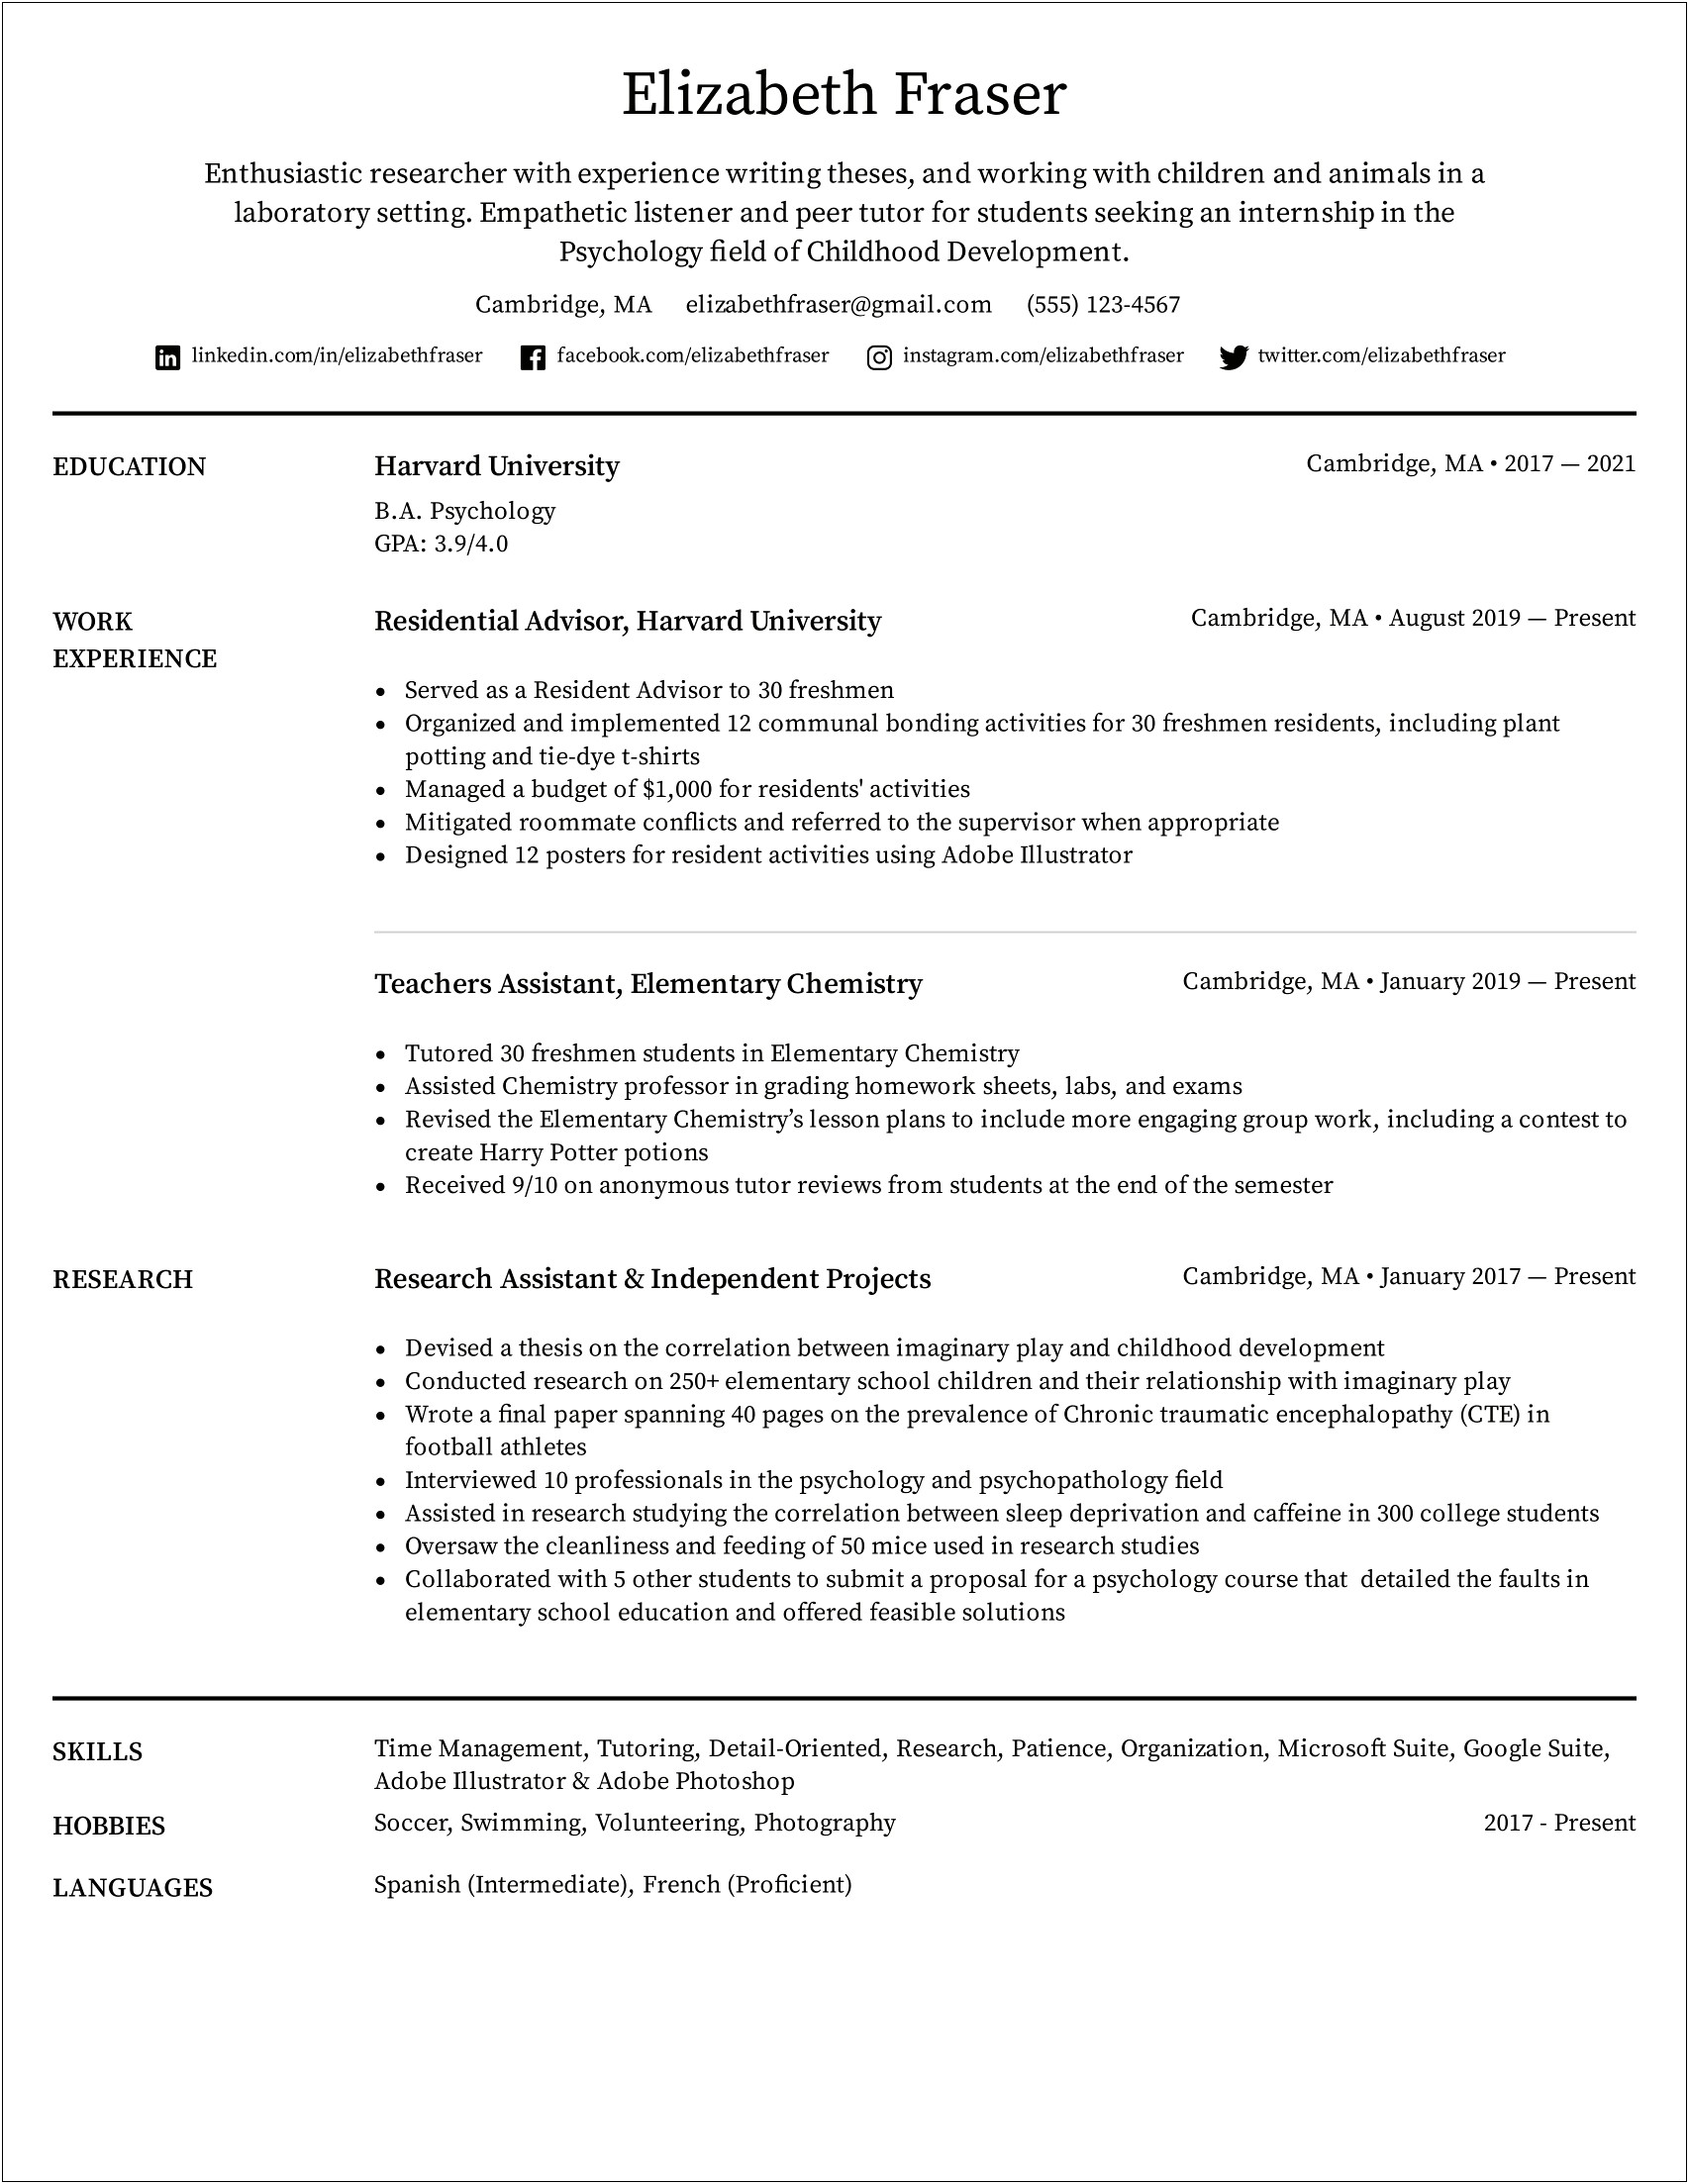 Resume Format For College Campus Jobs